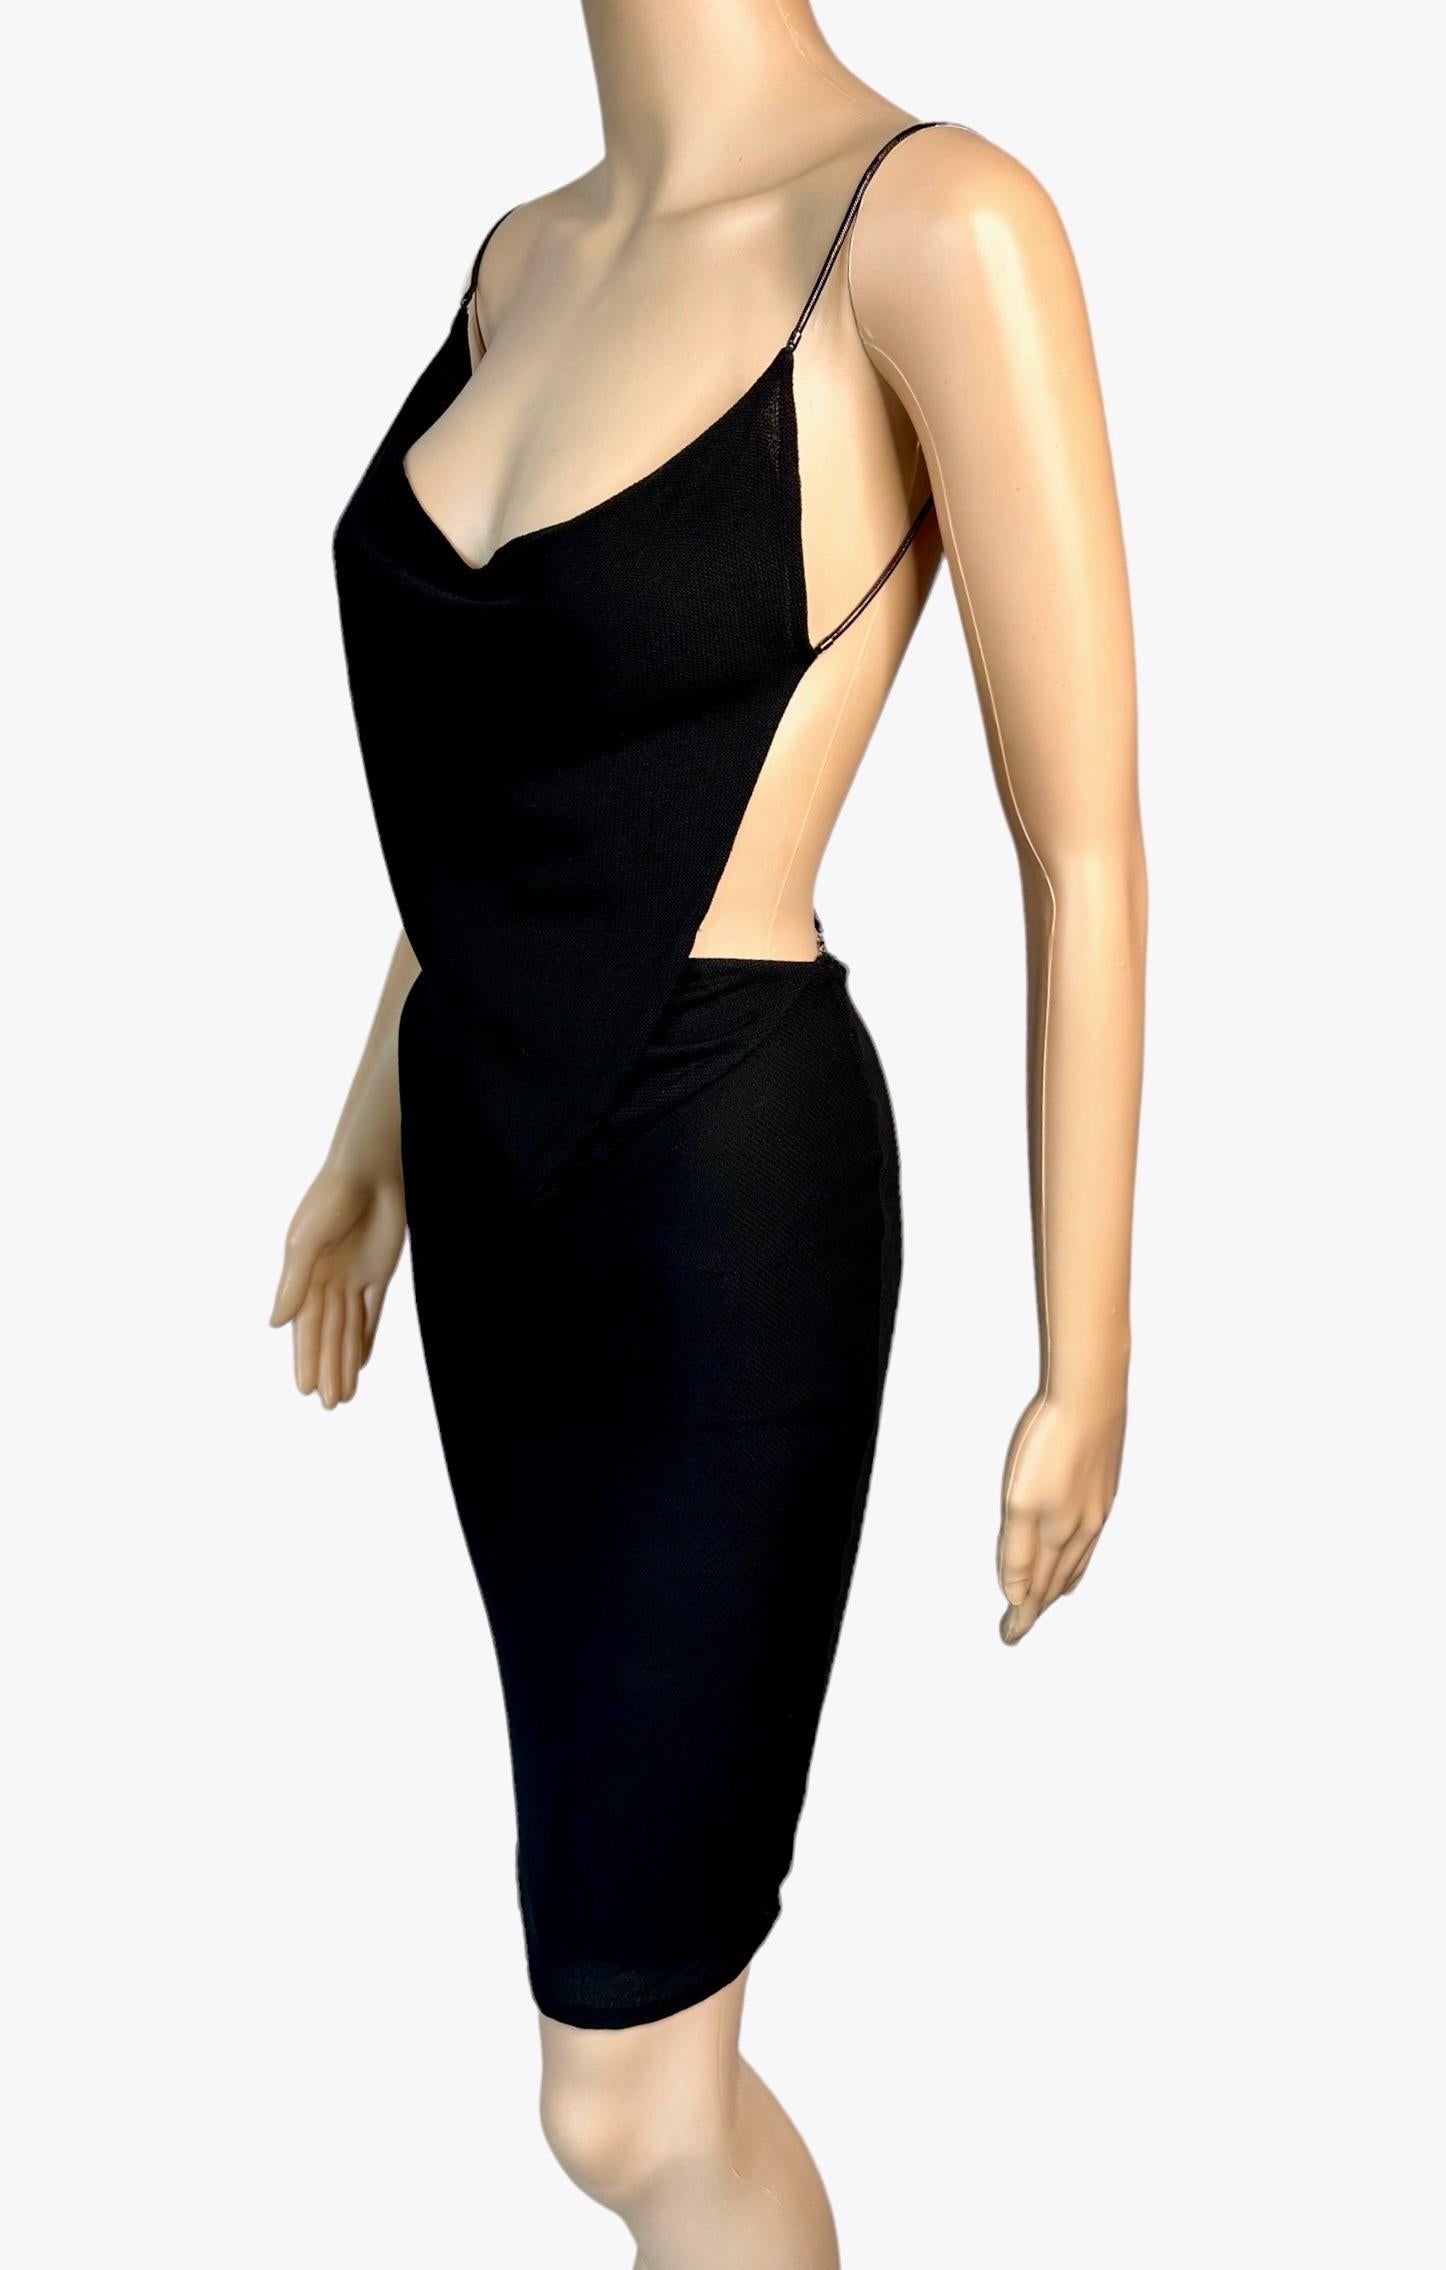 Tom Ford for Gucci S/S 1997 Runway Chain Cutout Backless Sheer Knit Black Dress For Sale 3